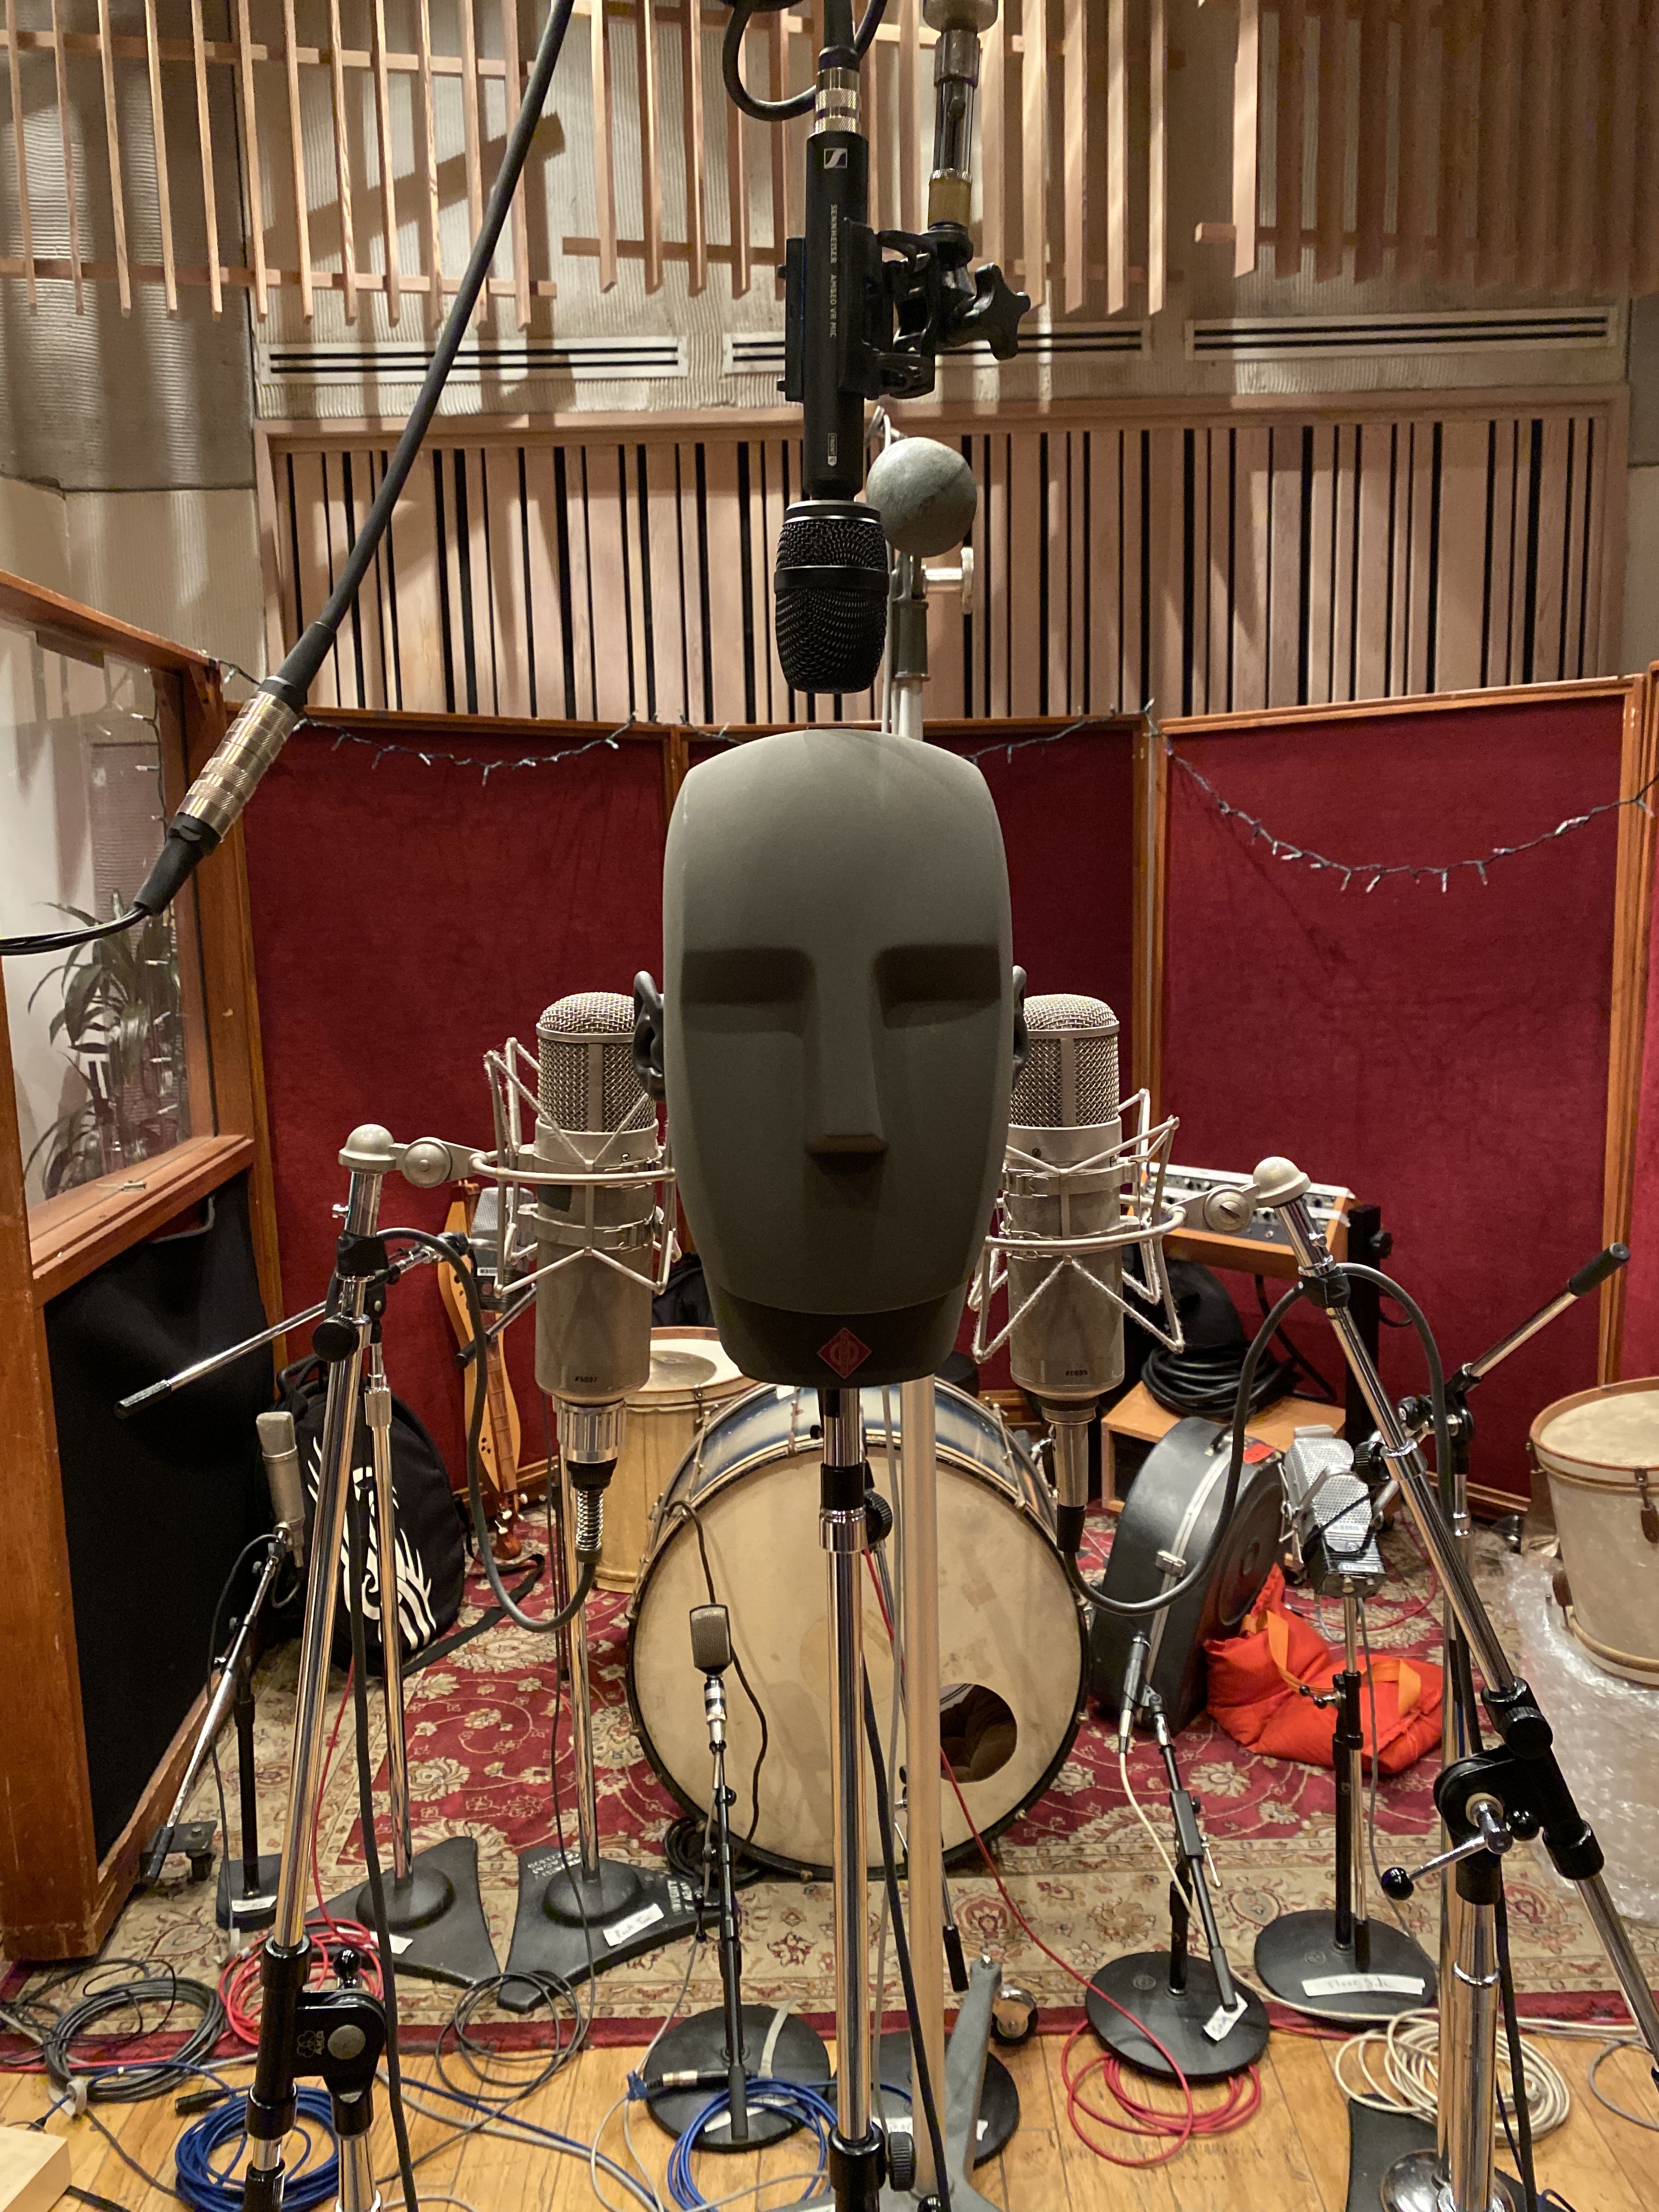 During the recording session at Henson Studio D, Michael Marquart deployed a Neumann KU 100 binaural head, flanked by two vintage Neumann U 47 tube microphones. The AMBEO VR Mic was placed above. ​
Photo courtesy of Michael Marquart